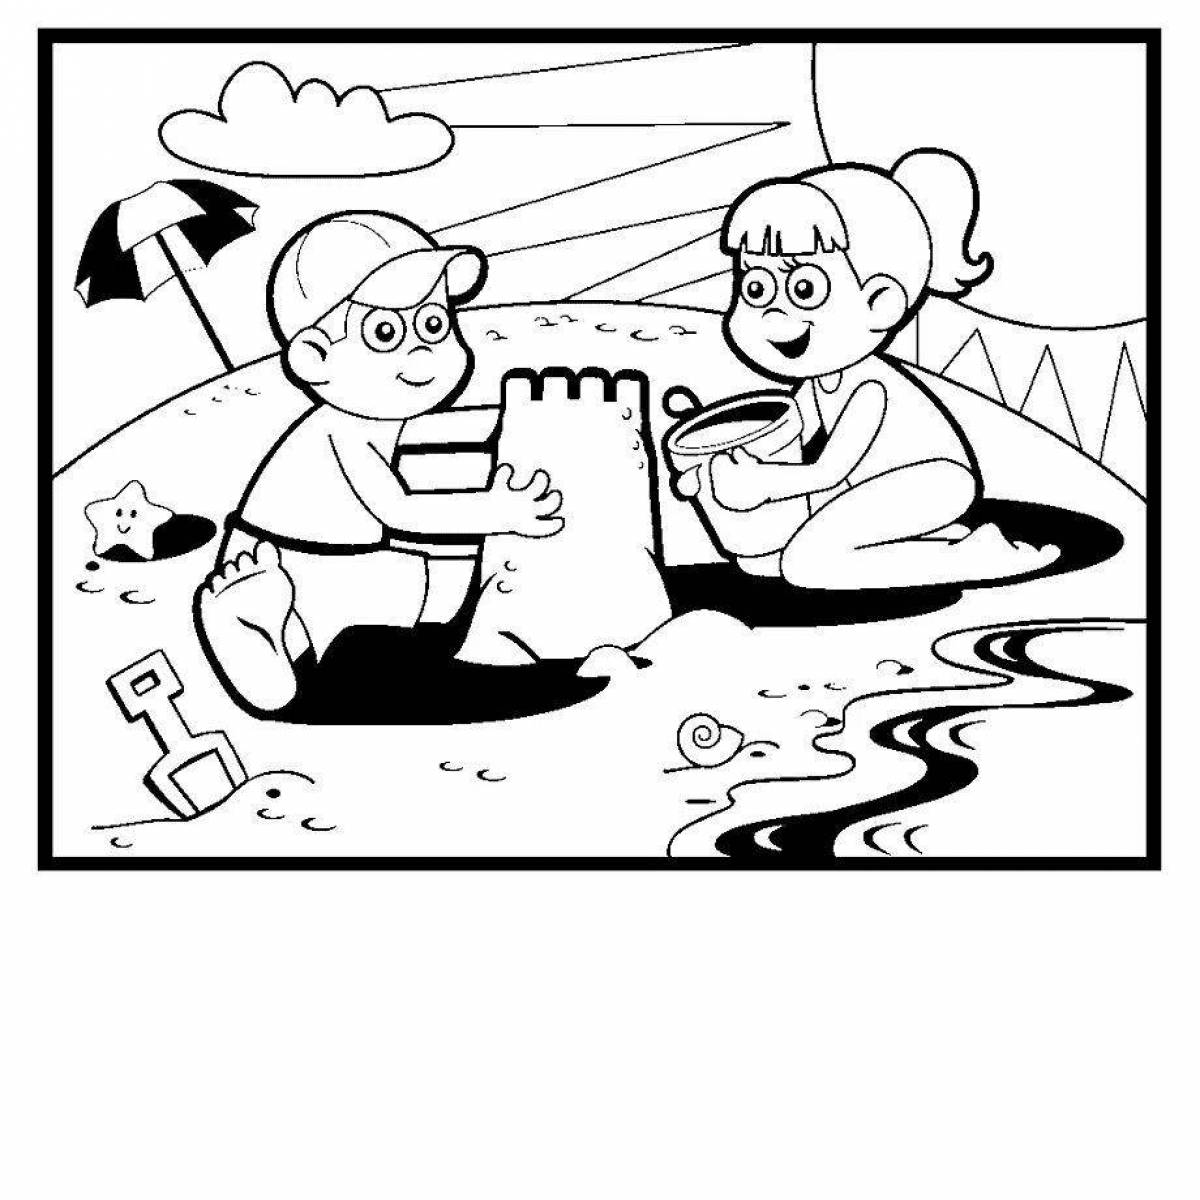 Colorful sand game coloring page